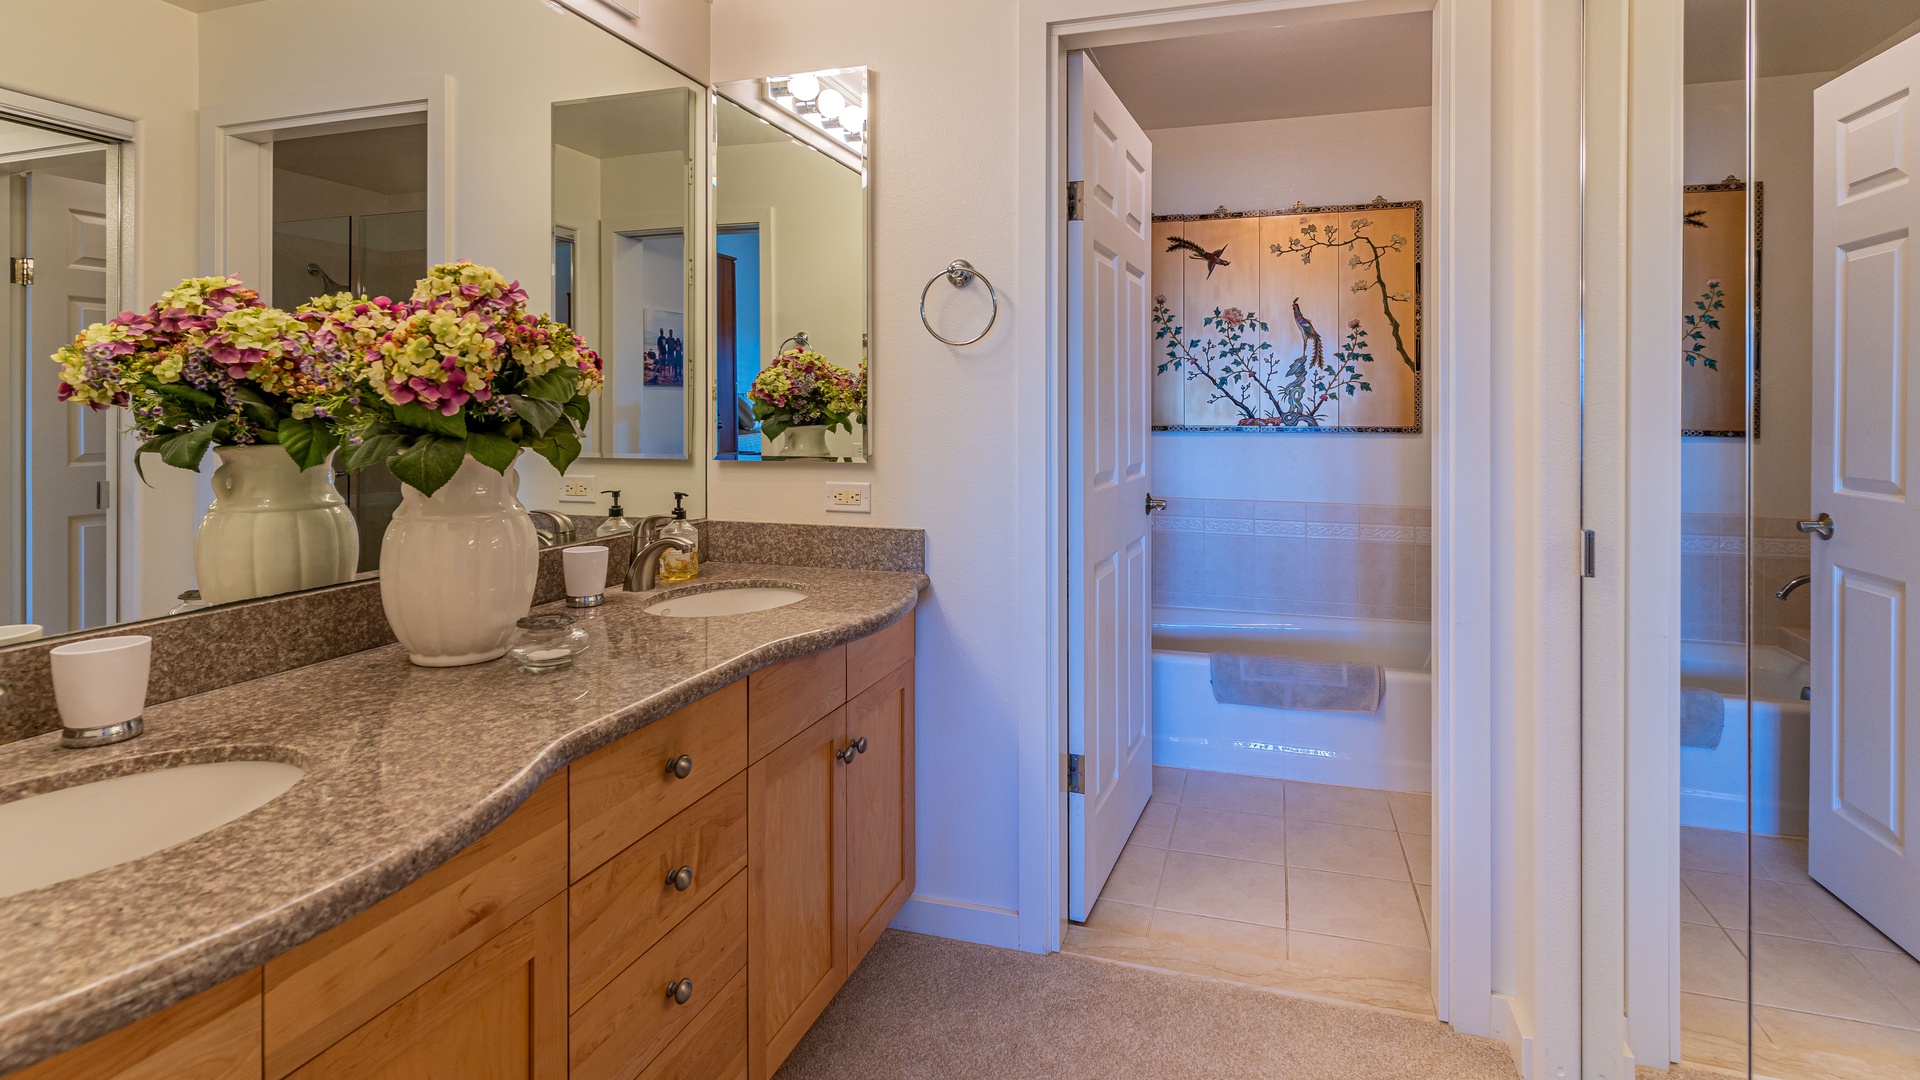 Kapolei Vacation Rentals, Kai Lani 16C - The primary guest bathroom is a tastefully decorated full bathroom.